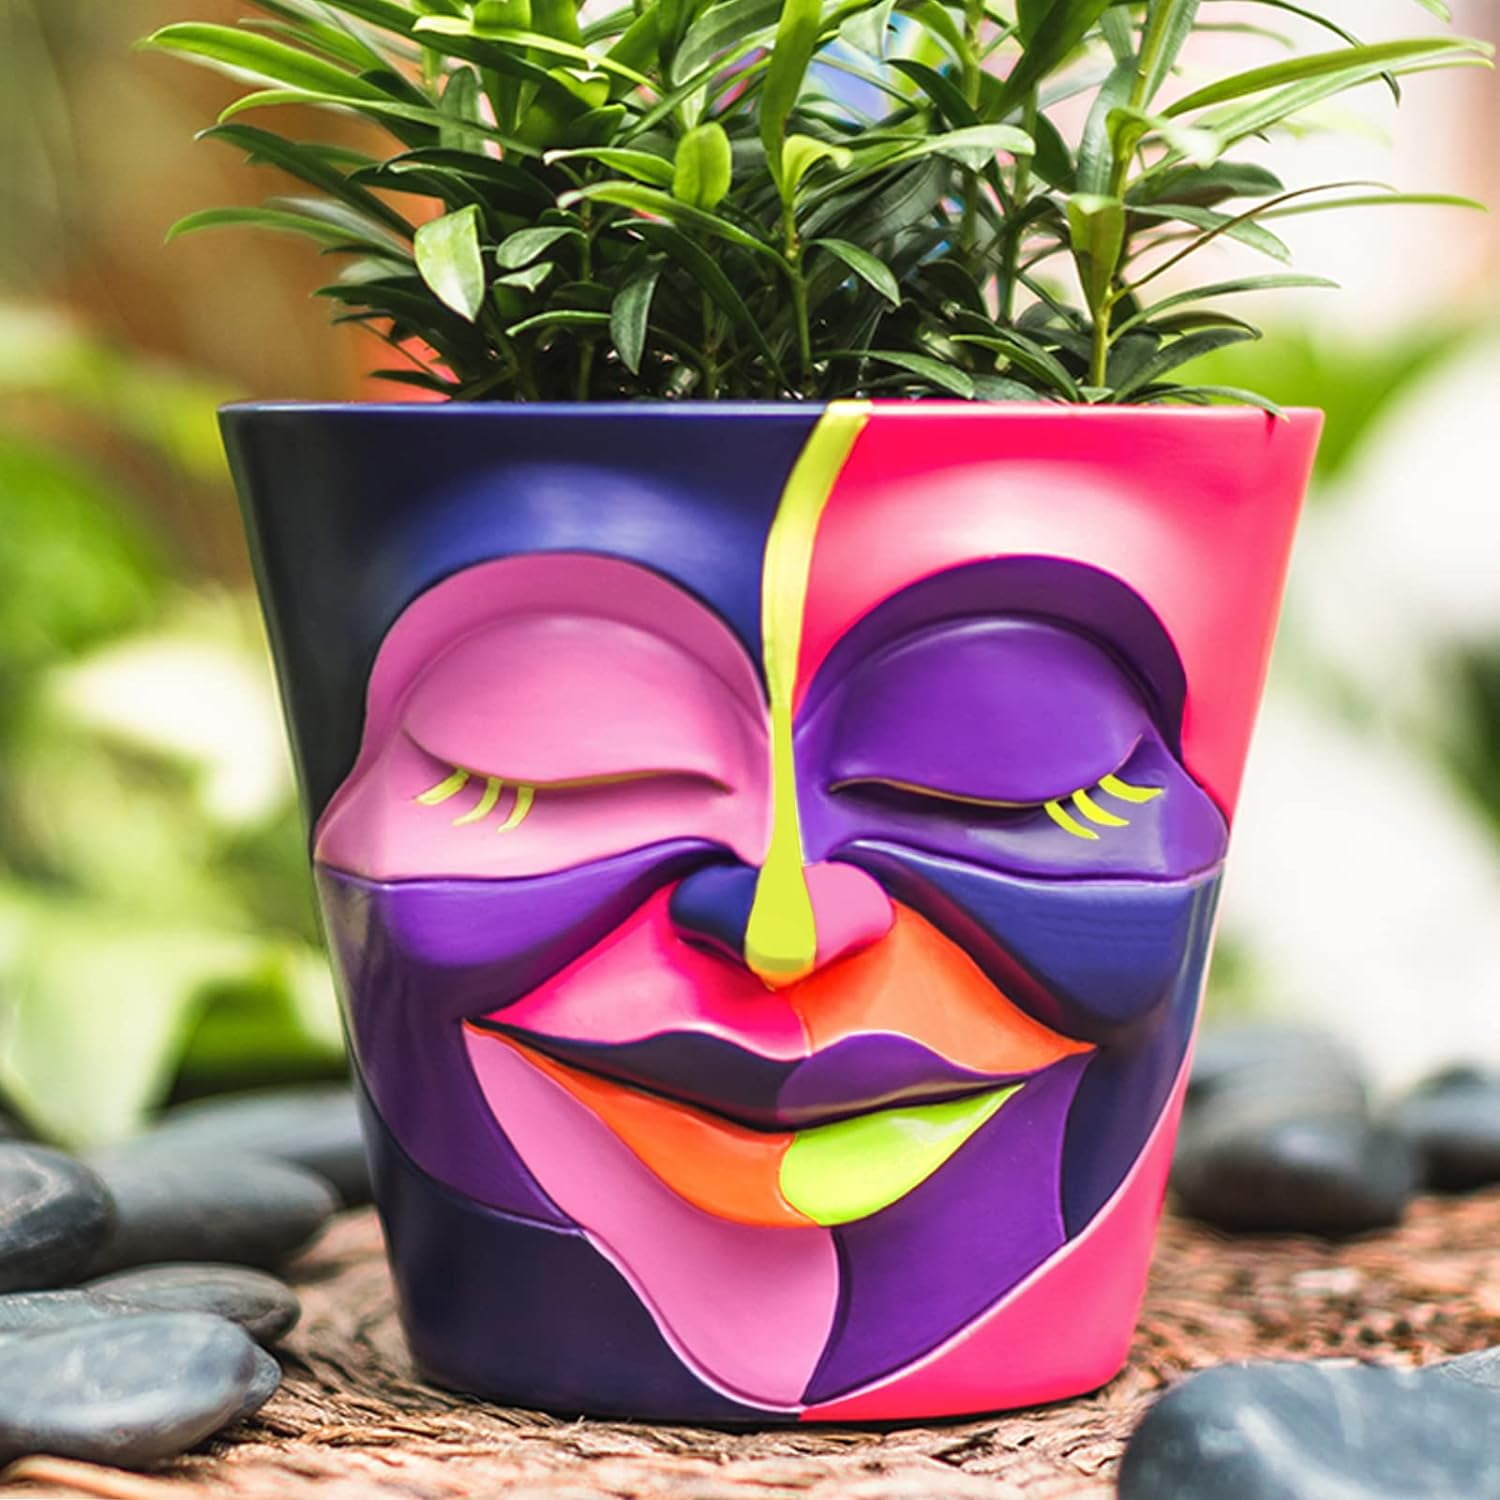 GUGUGO Abstract Rainbow Head Planter, Unique Face Plant Pot with ...